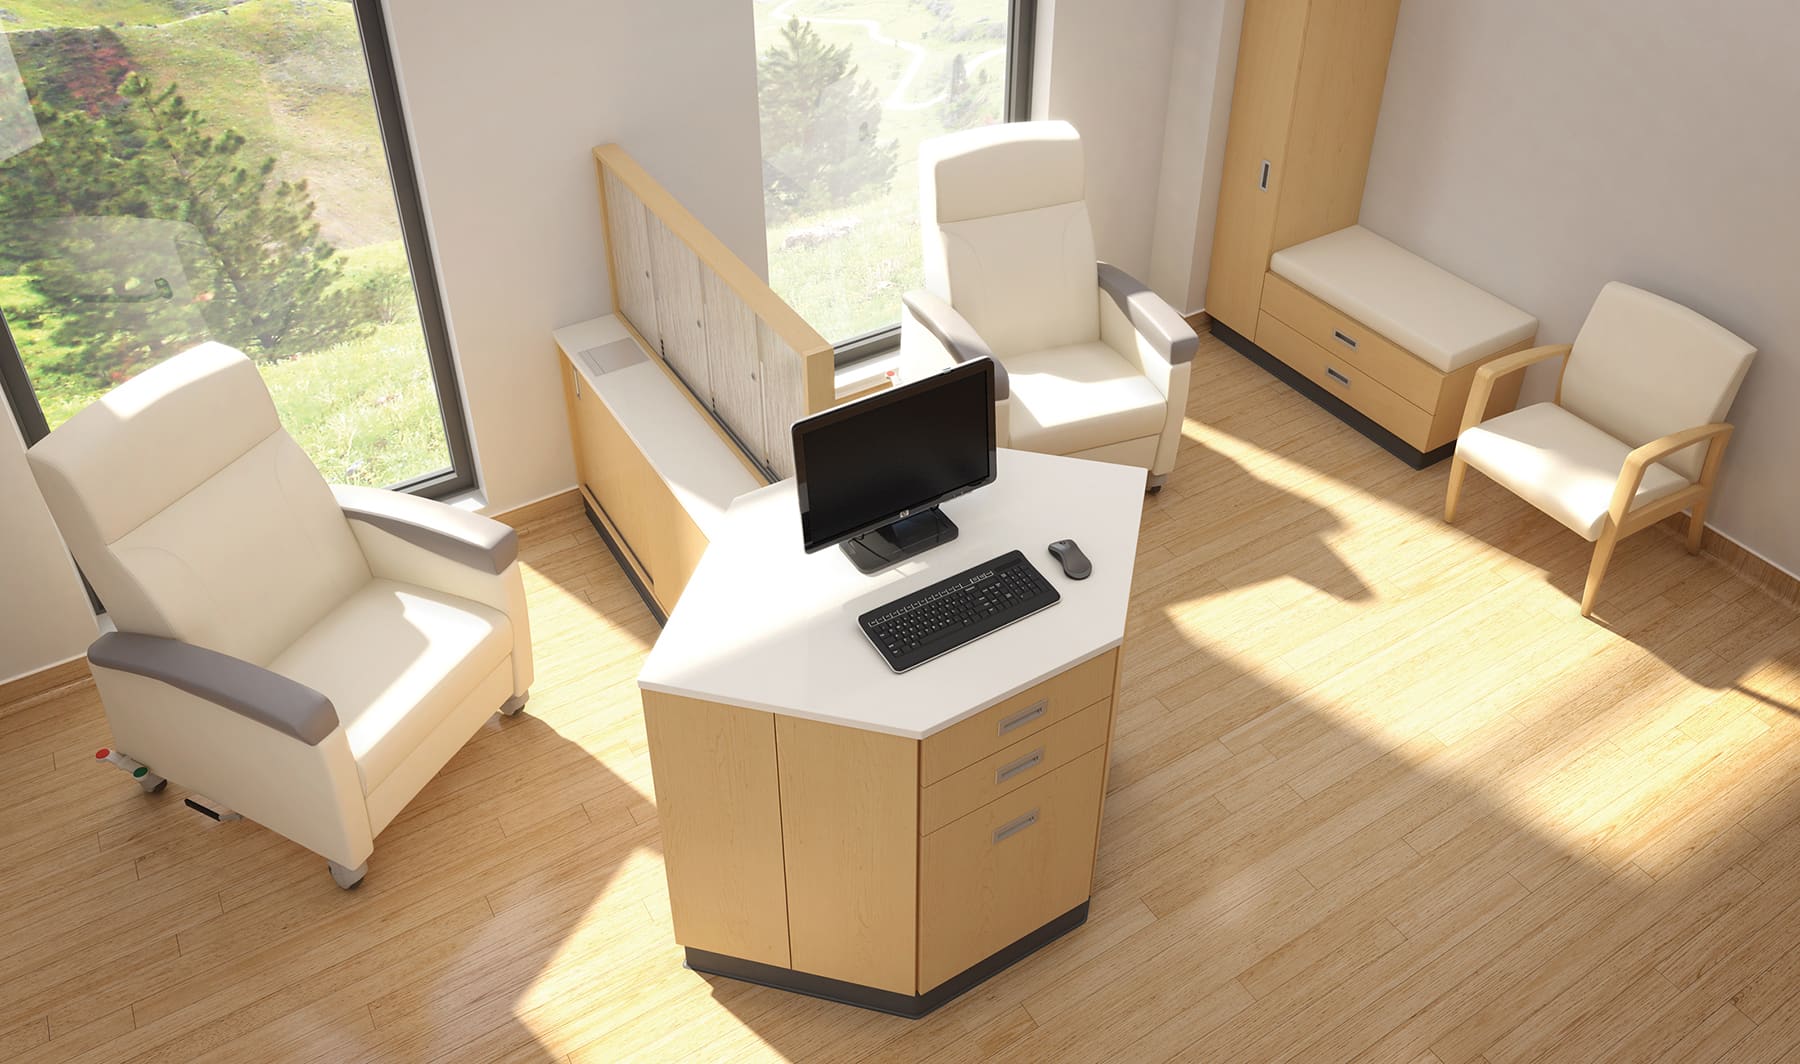 Room with Tranquility healthcare furniture